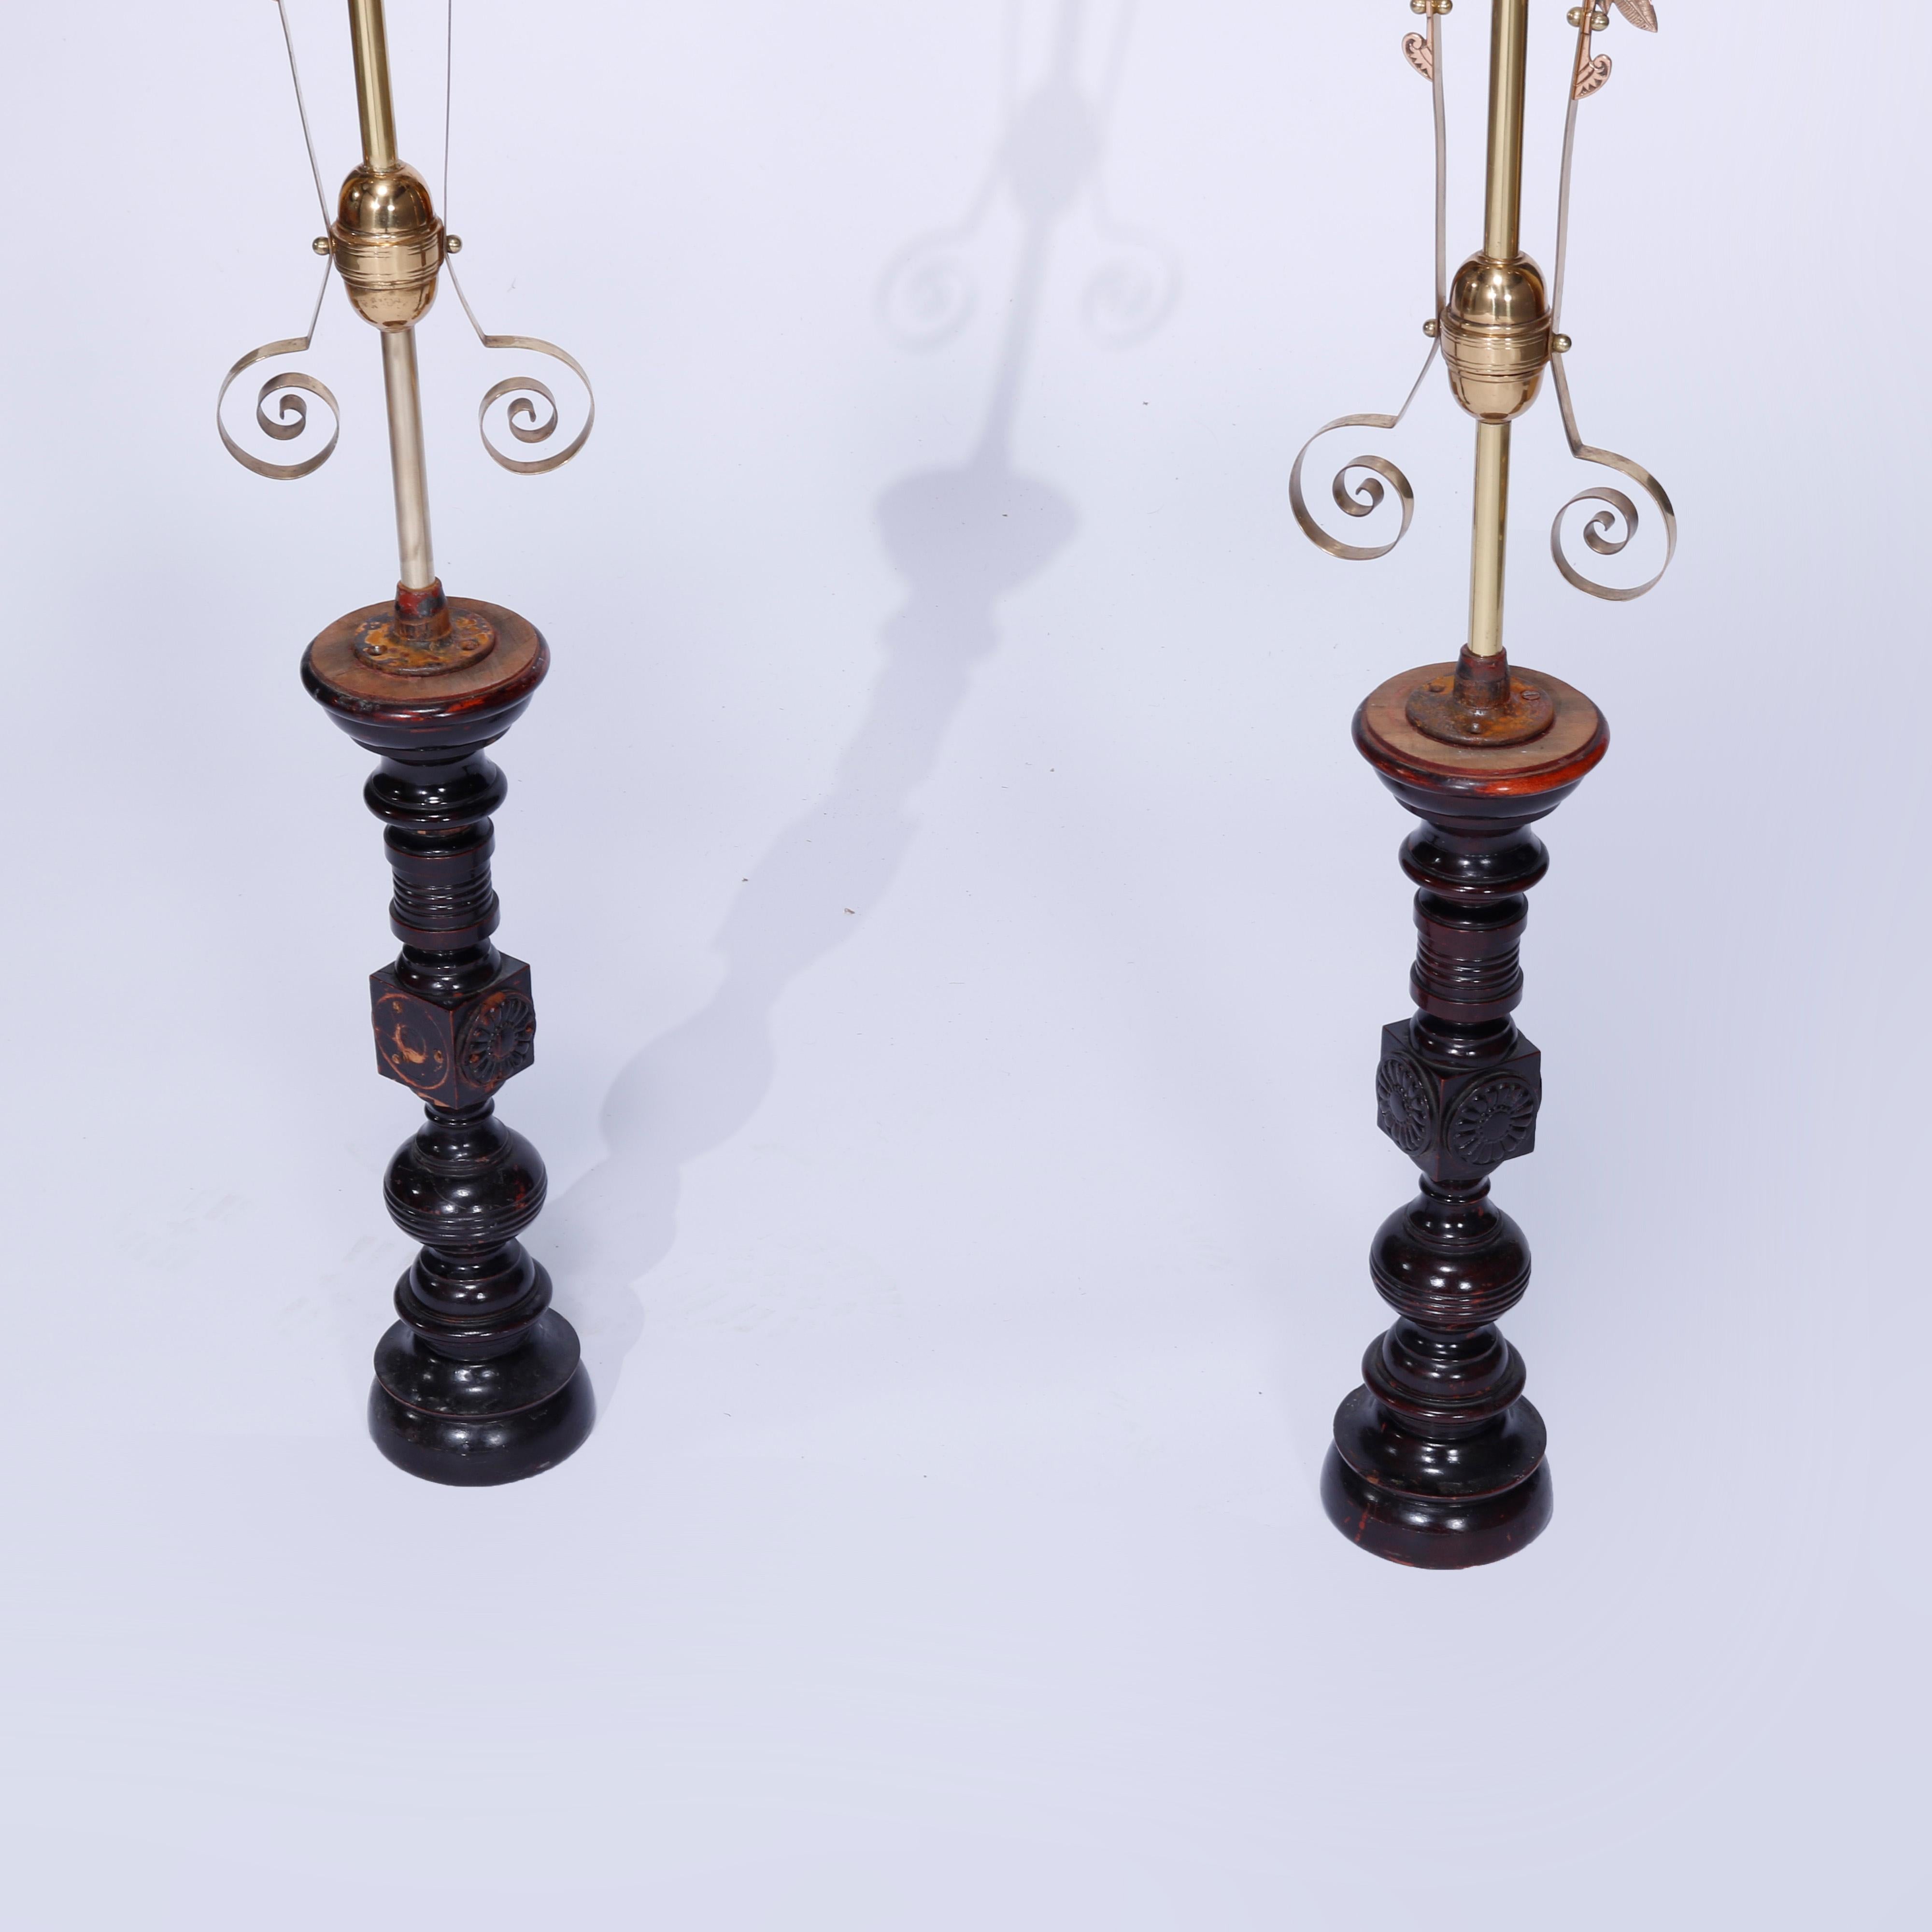 Antique Pair Aesthetic Brass & Mahogany Newell Post Candelabra Lights, C1870 For Sale 2